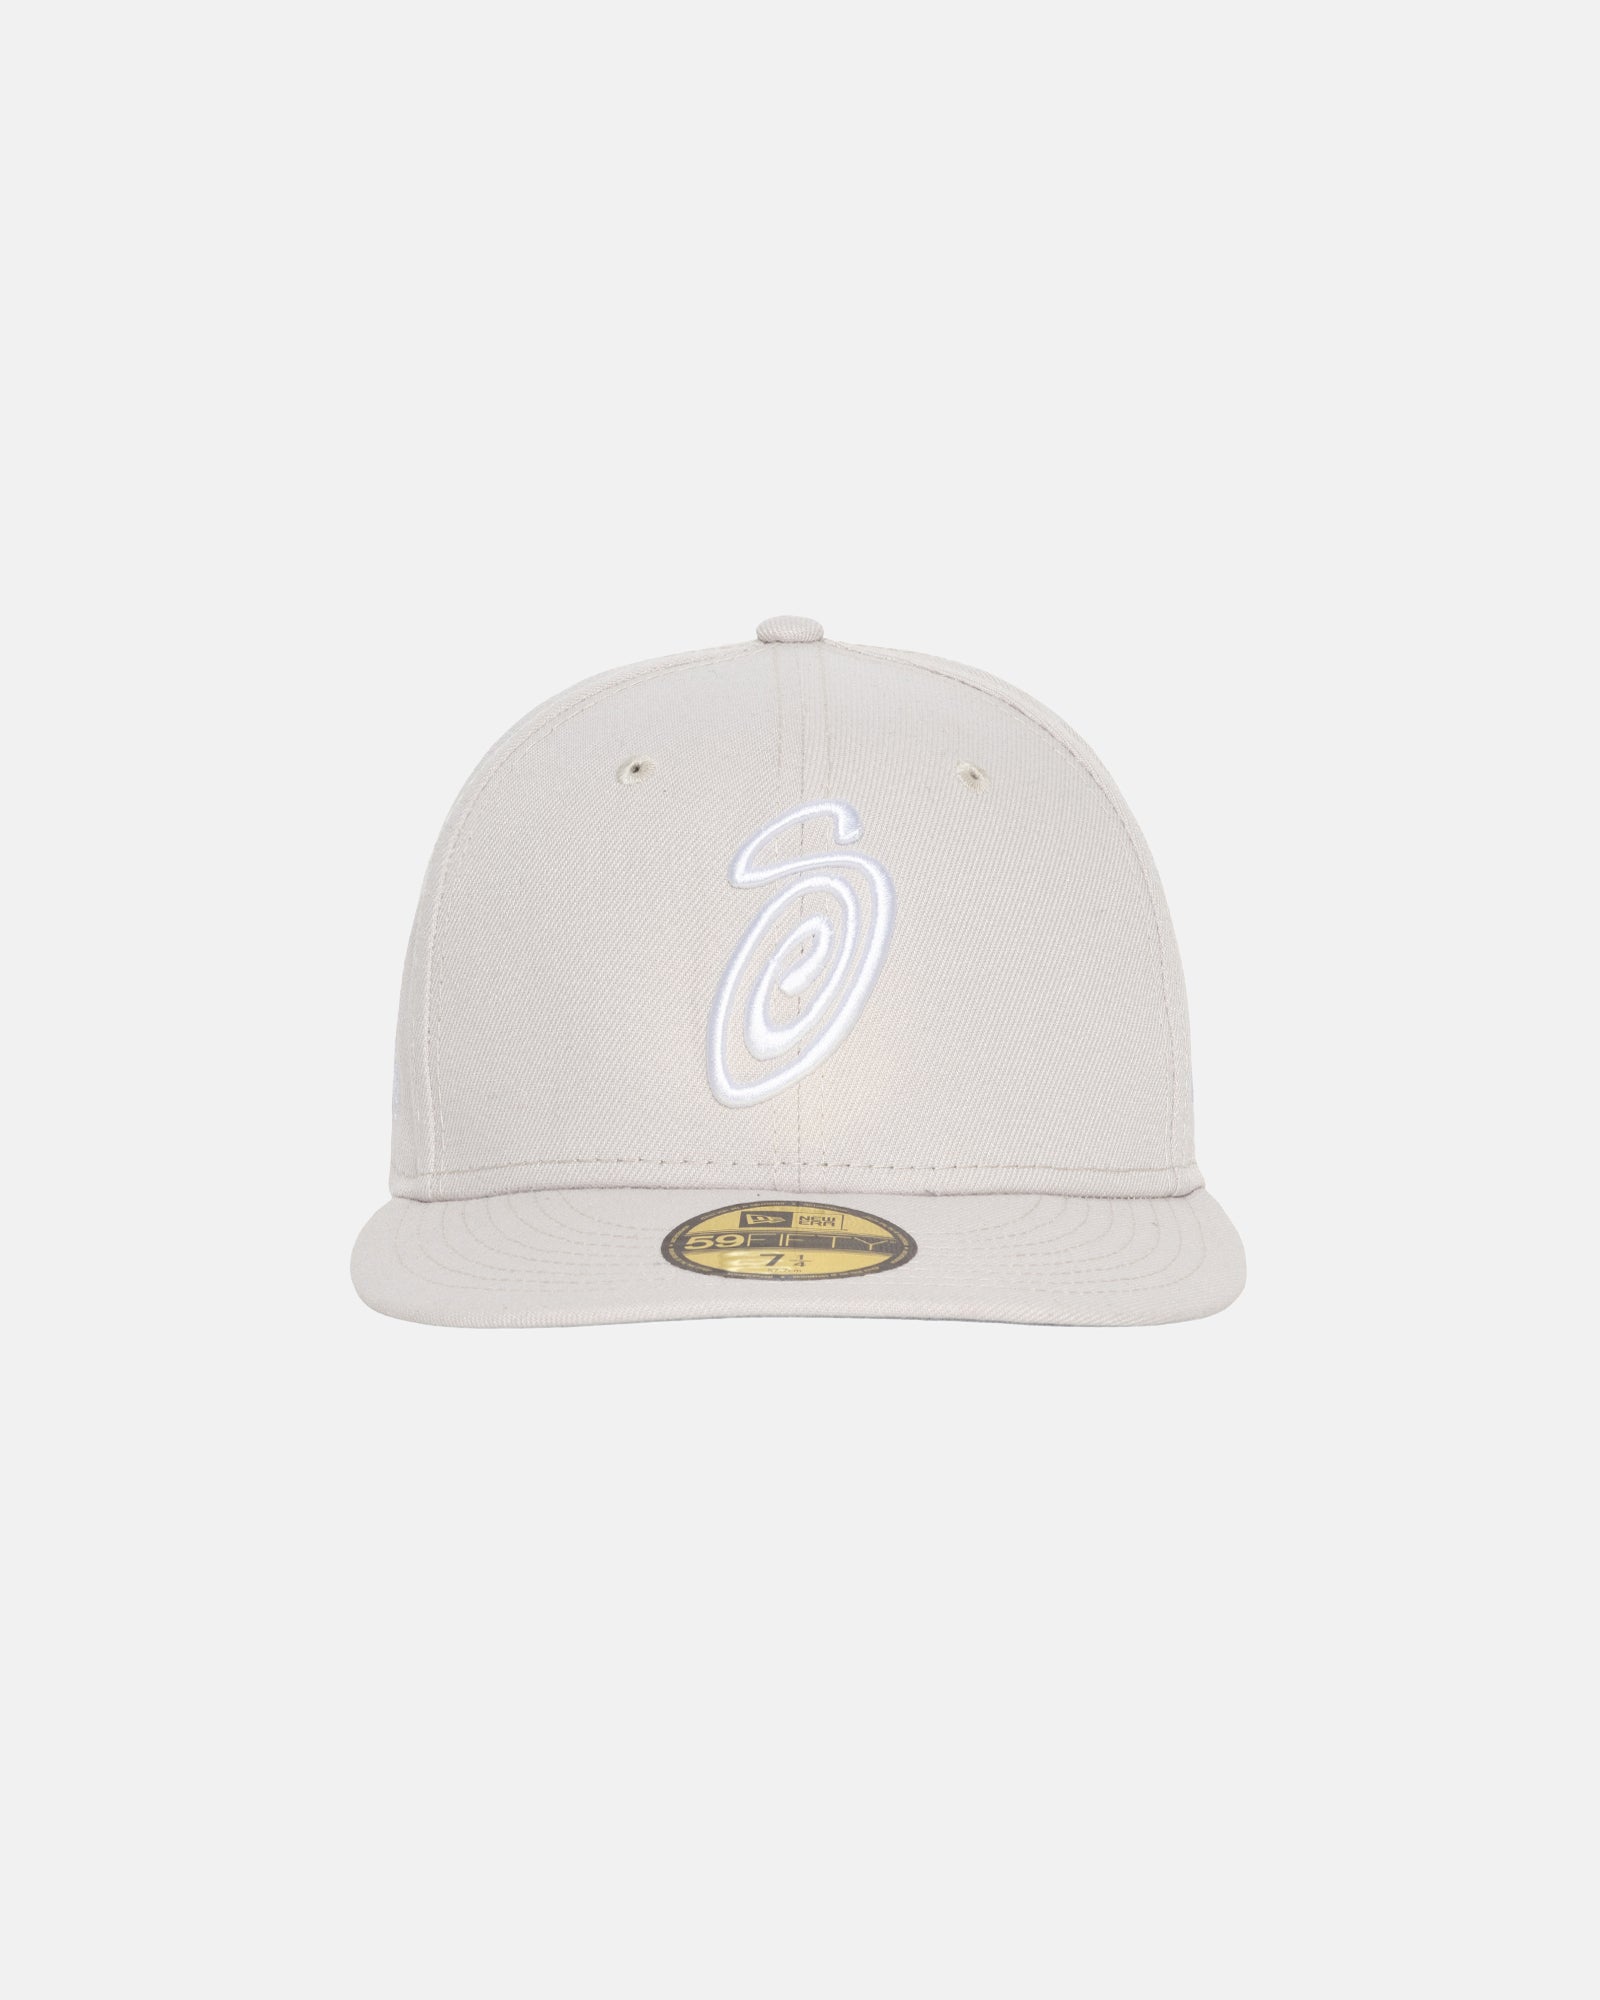 STUSSY CURLY S 59FIFTY NEW ERA CAP | gualterhelicopteros.com.br